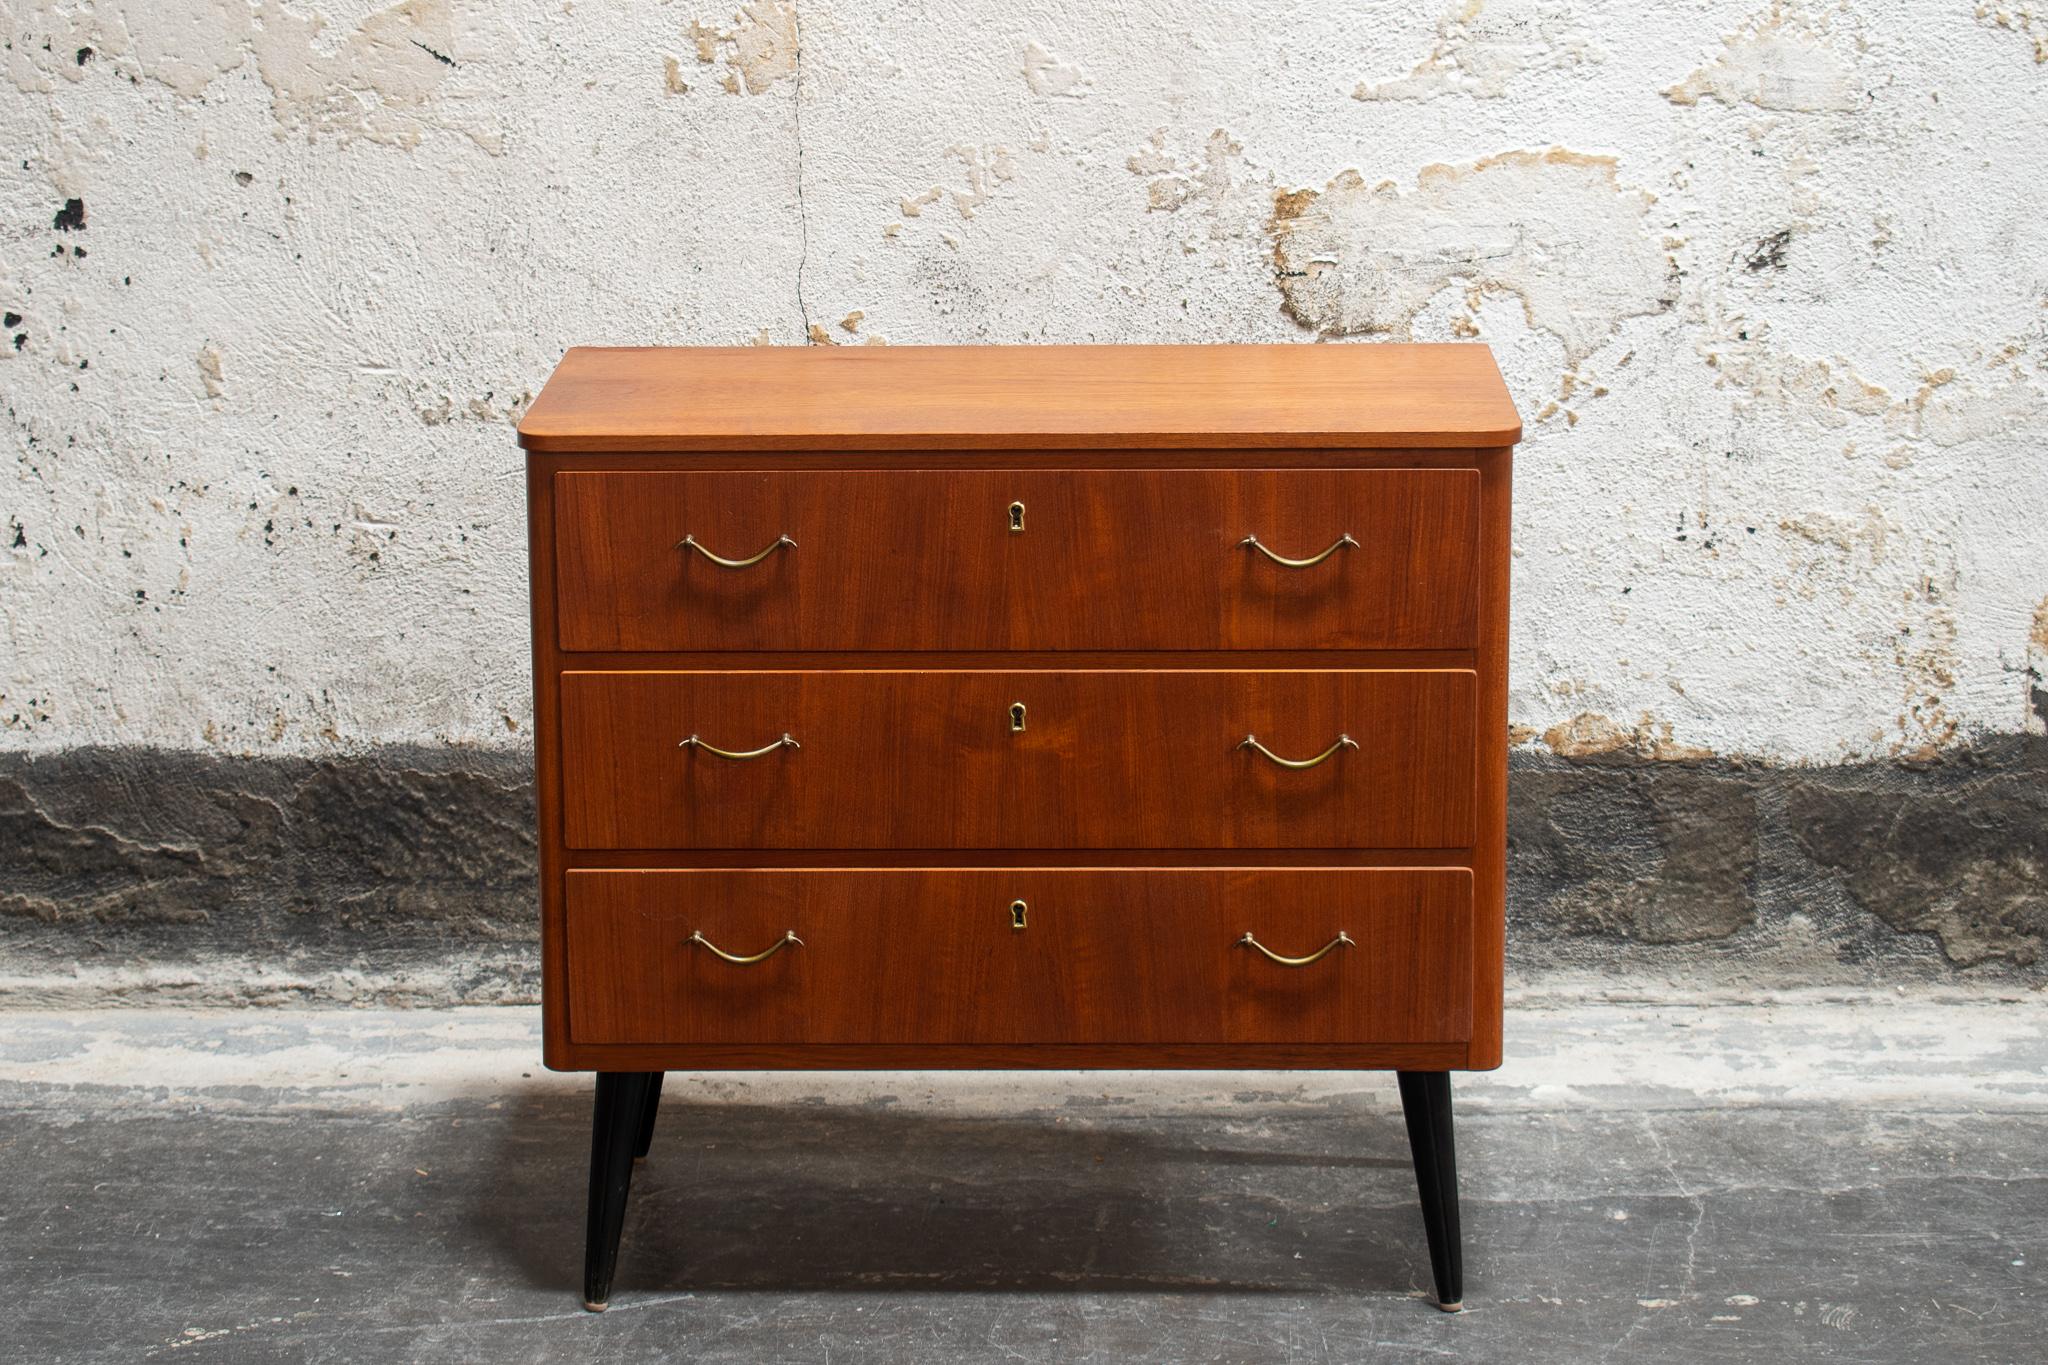 Three drawer teak chest on round black tapered legs with original brass hardware.

A great piece to store your bedding or clothes. A handsome piece of furniture in any room.